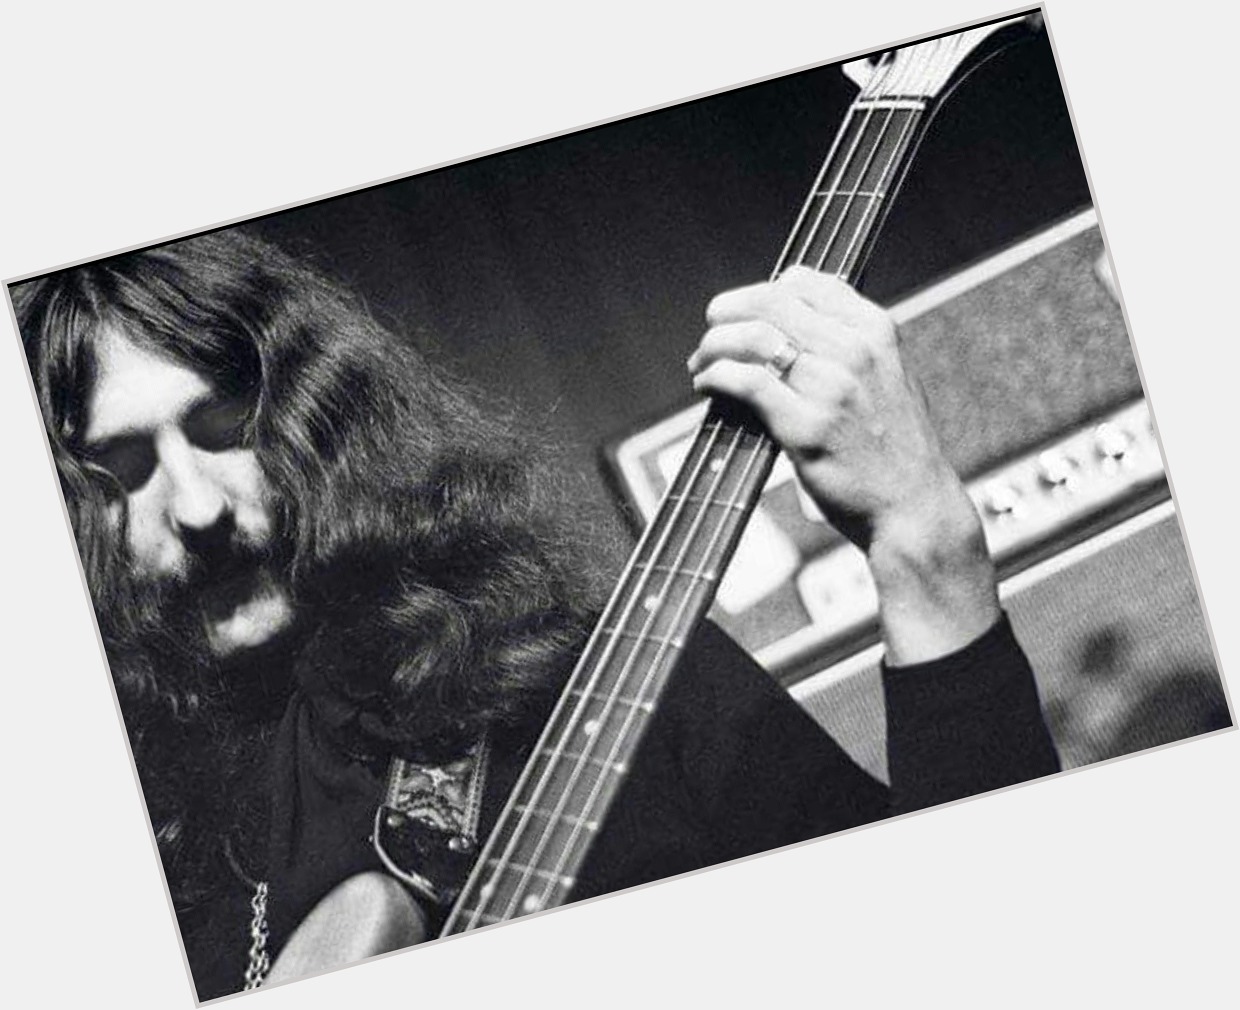 Born July 17, 1949...Happy Birthday to the mighty Geezer Butler. 